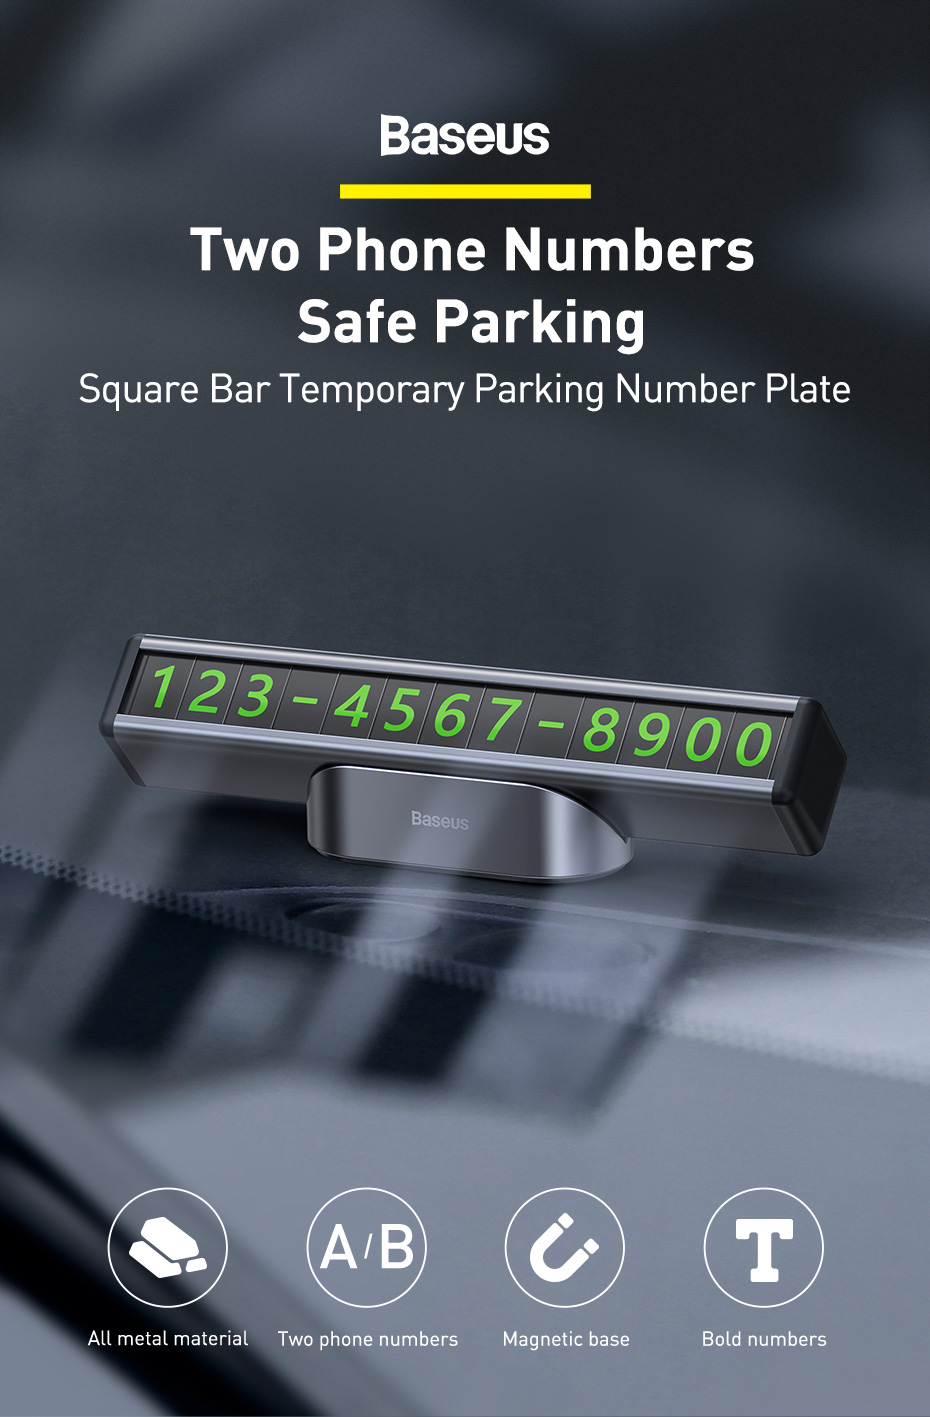 Baseus-Square-Bar-Temporary-Parking-Number-Plate-All-Metal-Material--Two-Phone-Numbers--Magnetic-Bas-1873489-1